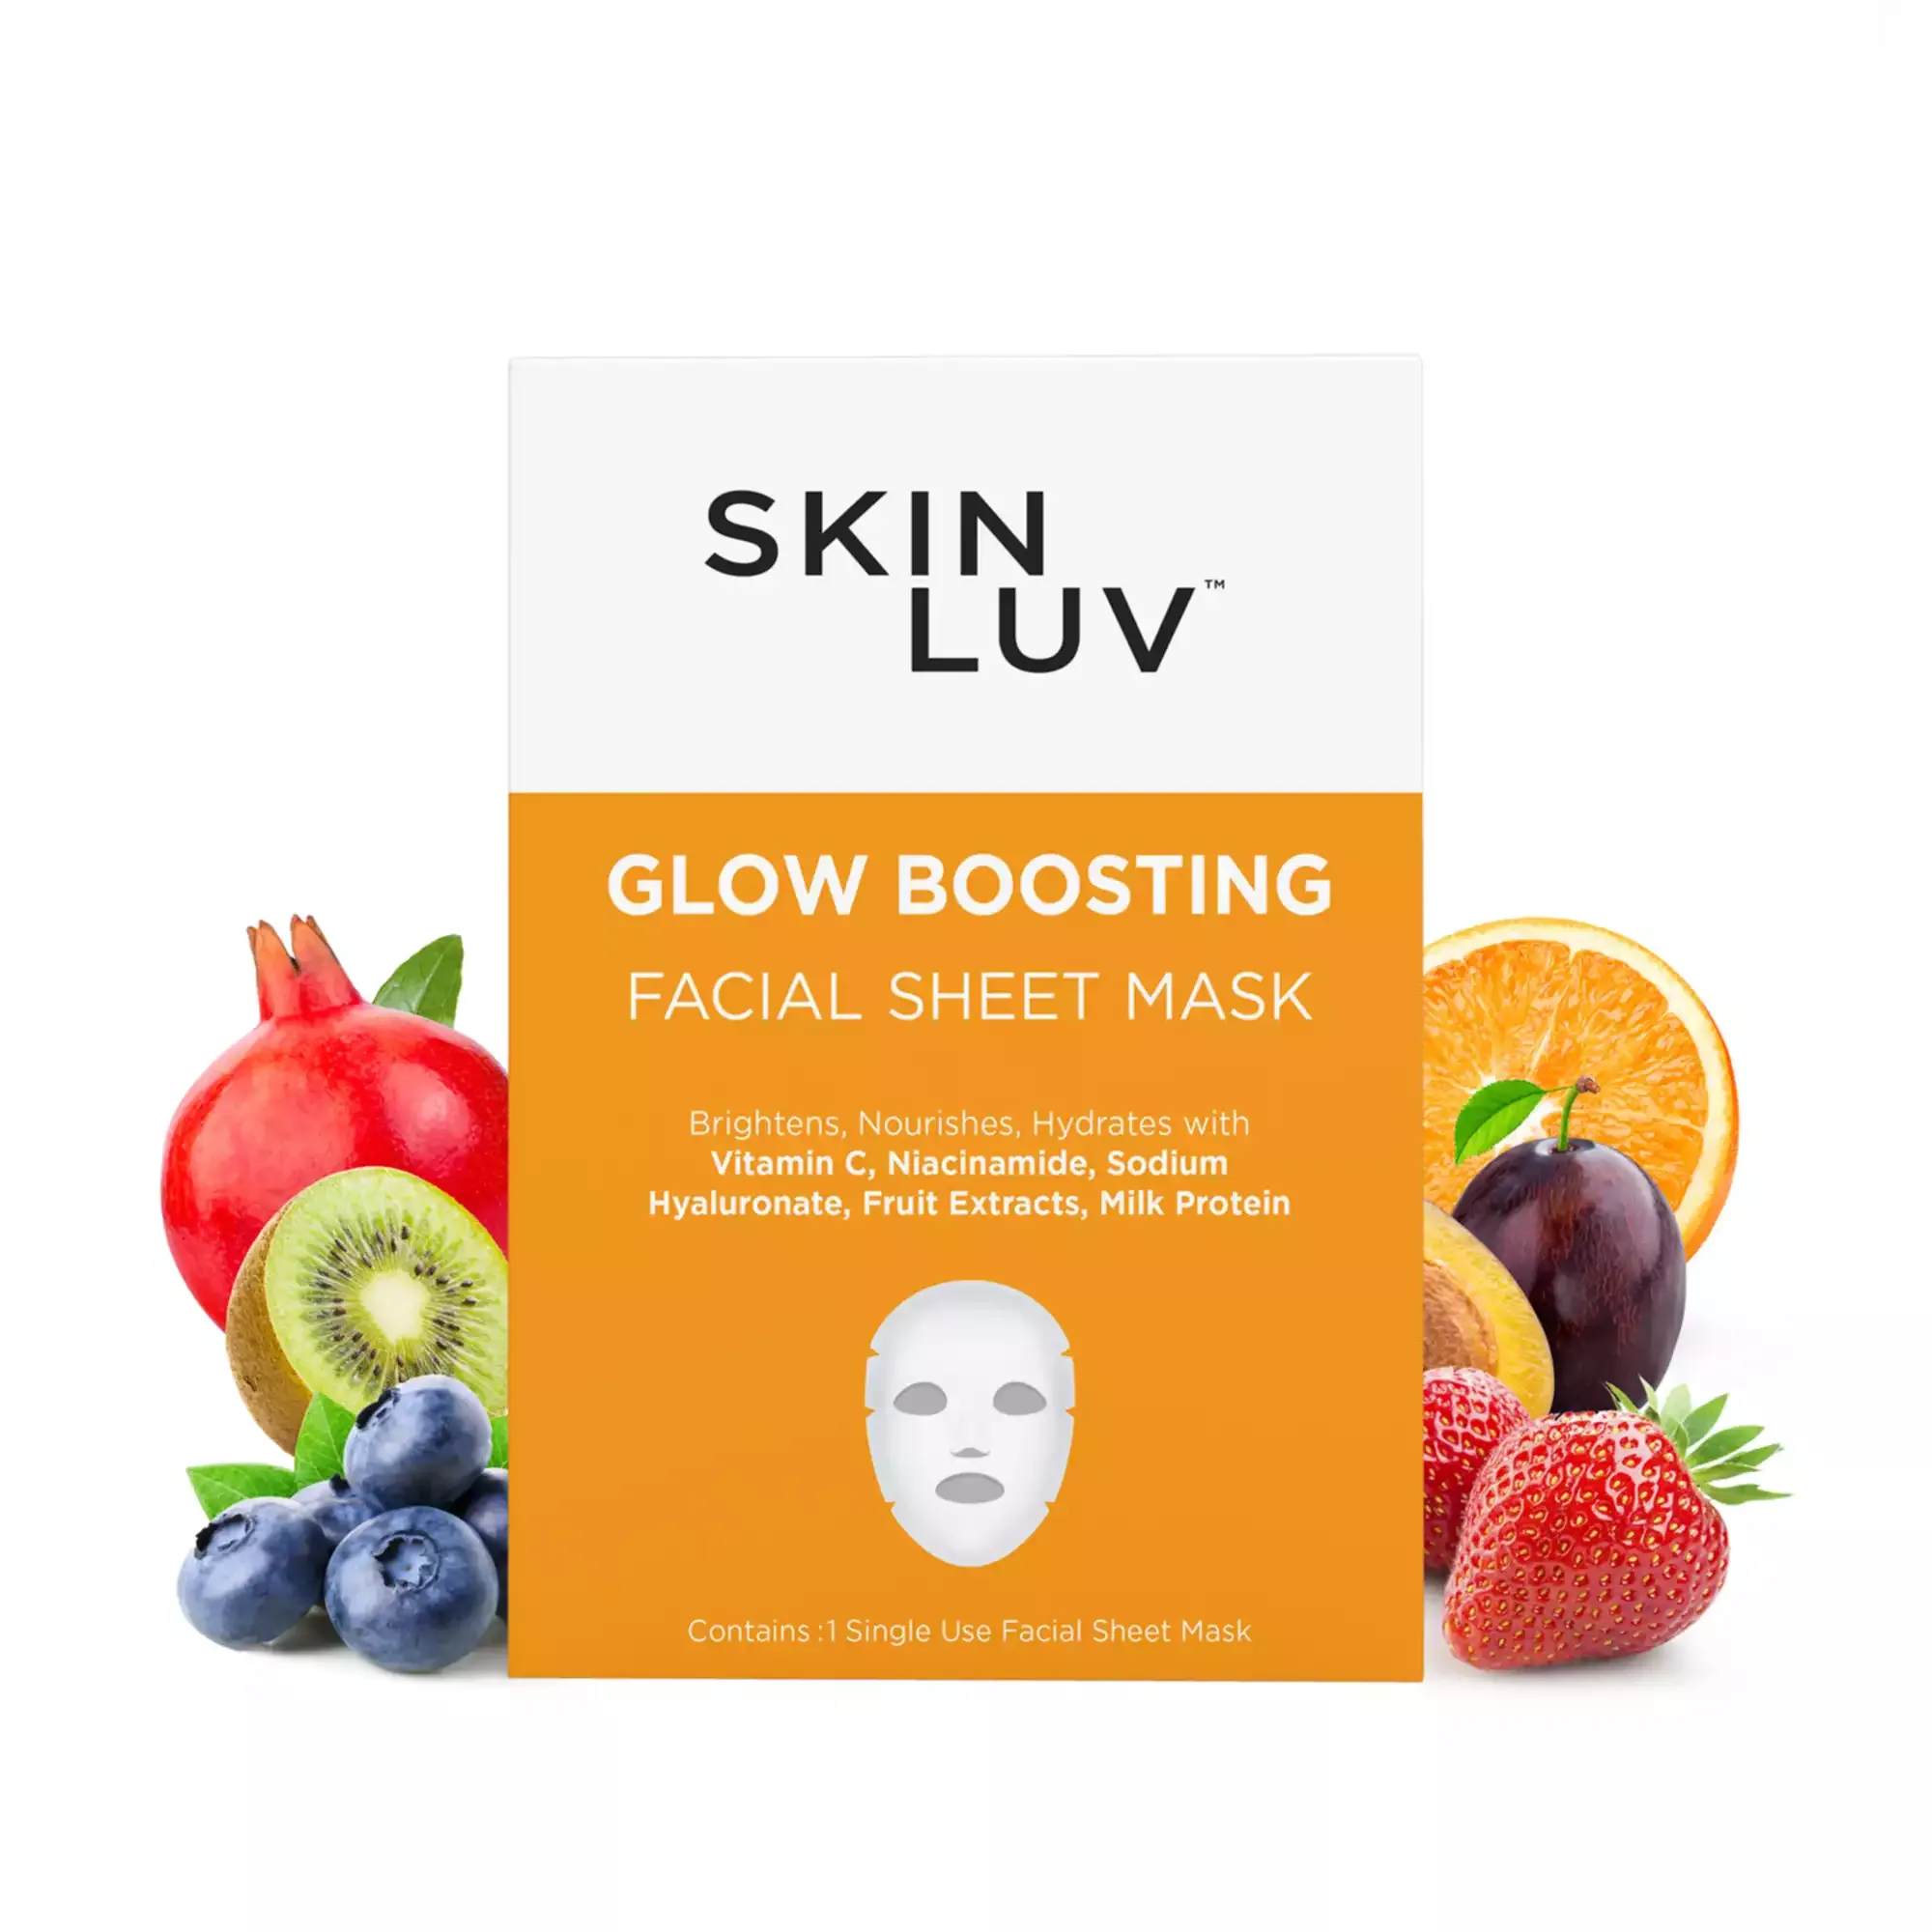 SKINLUV Glow Boosting Facial Sheet Mask Brightens, Nourishes, Hydrates Pack of 3